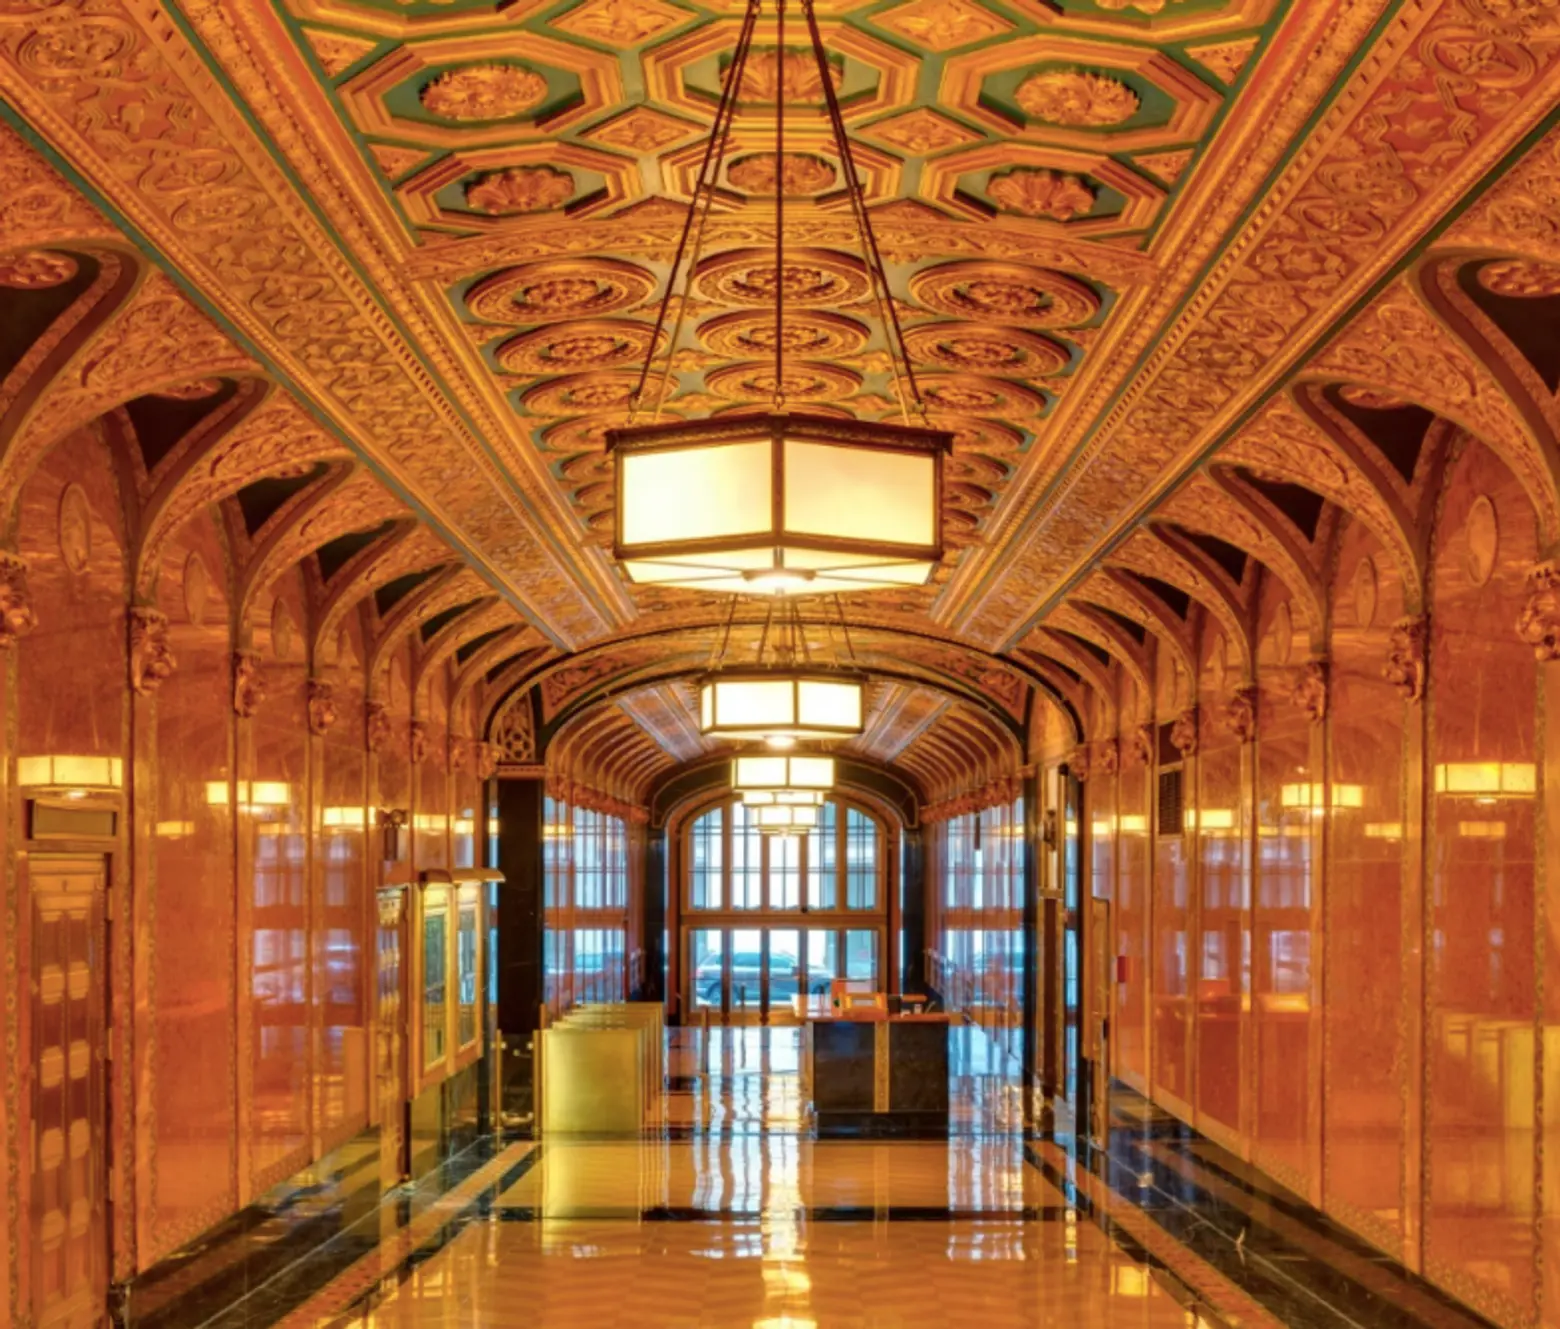 One of Manhattan’s most ornate office building lobbies is now a NYC landmark